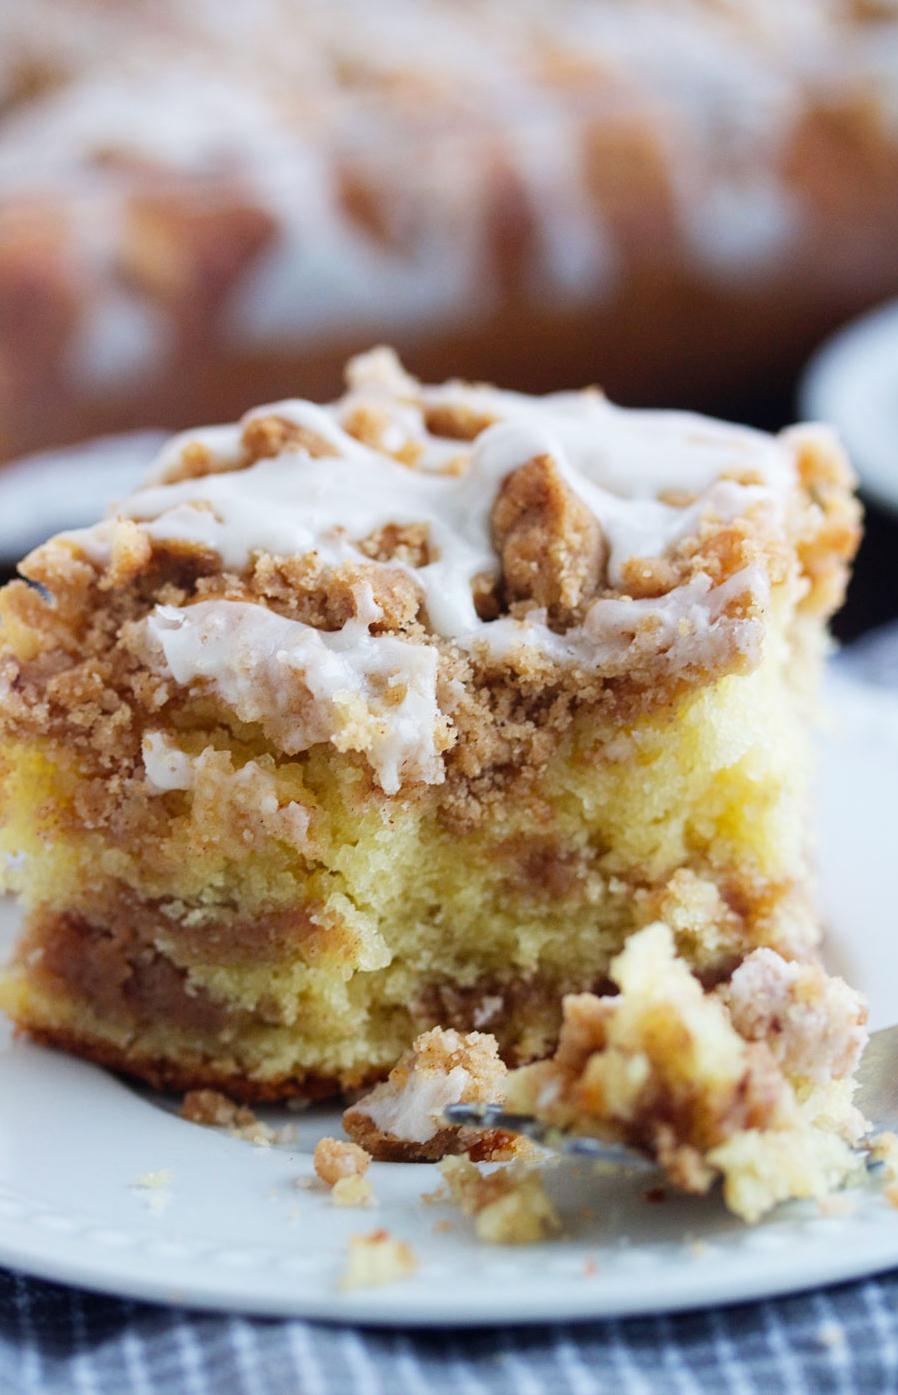  Your house will smell like a cinnamon wonderland when you bake this cake.